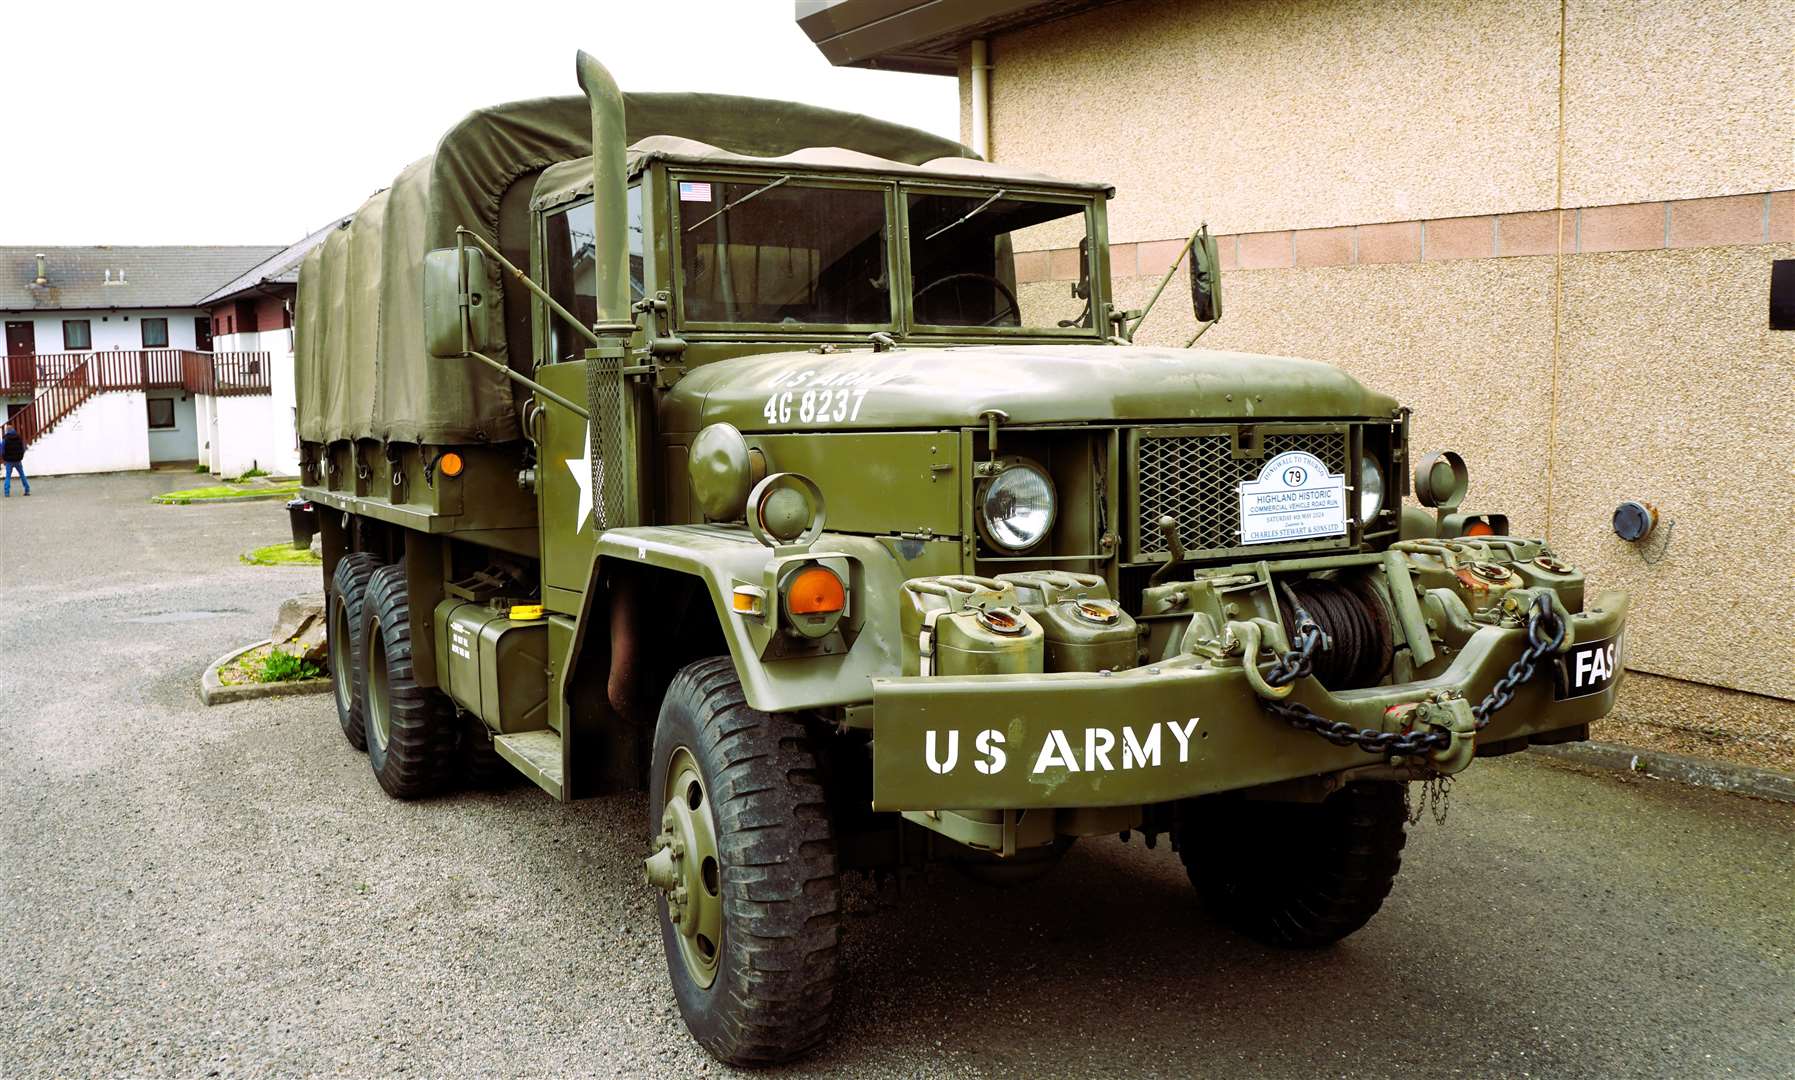 An American army truck sits at the car park of the Weigh Inn hotel in Thurso. Picture: DGS